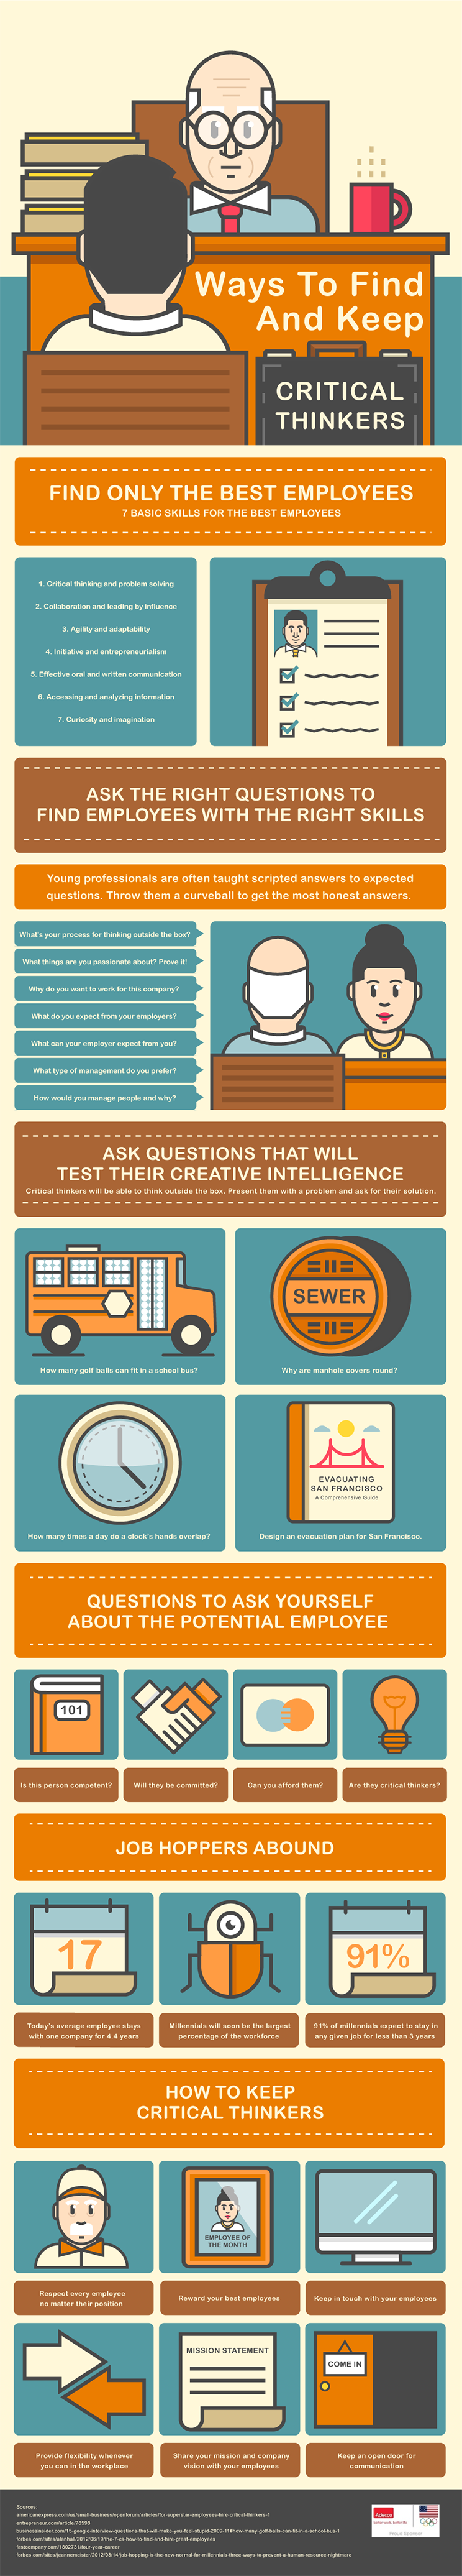 Infographic: Ways to Find and Keep Critical Thinkers